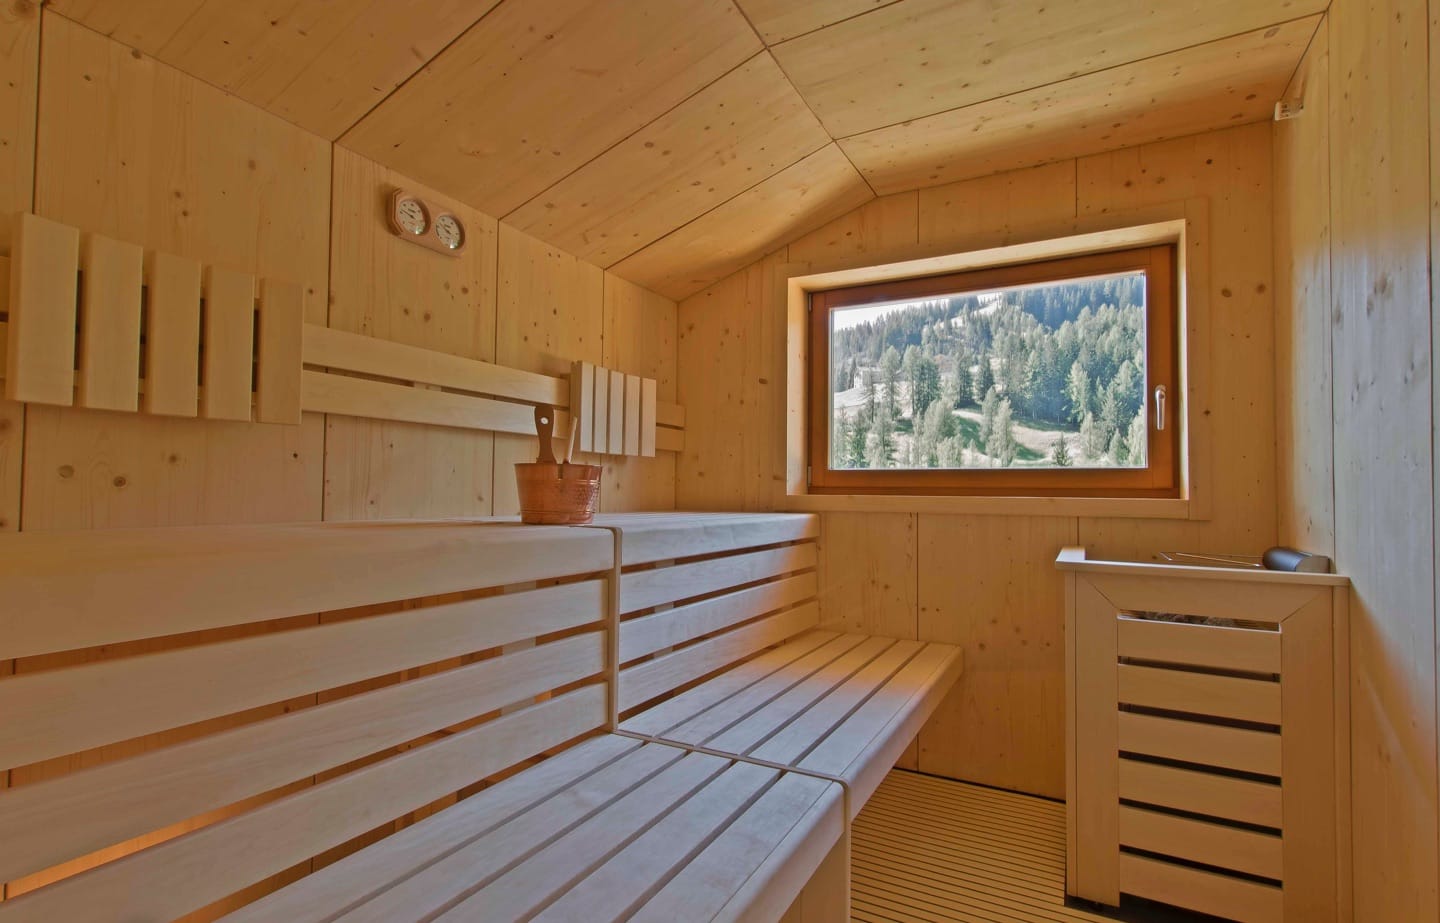 The relaxation area in the wellness space overlooks the magnificent woods of San Cassiano.